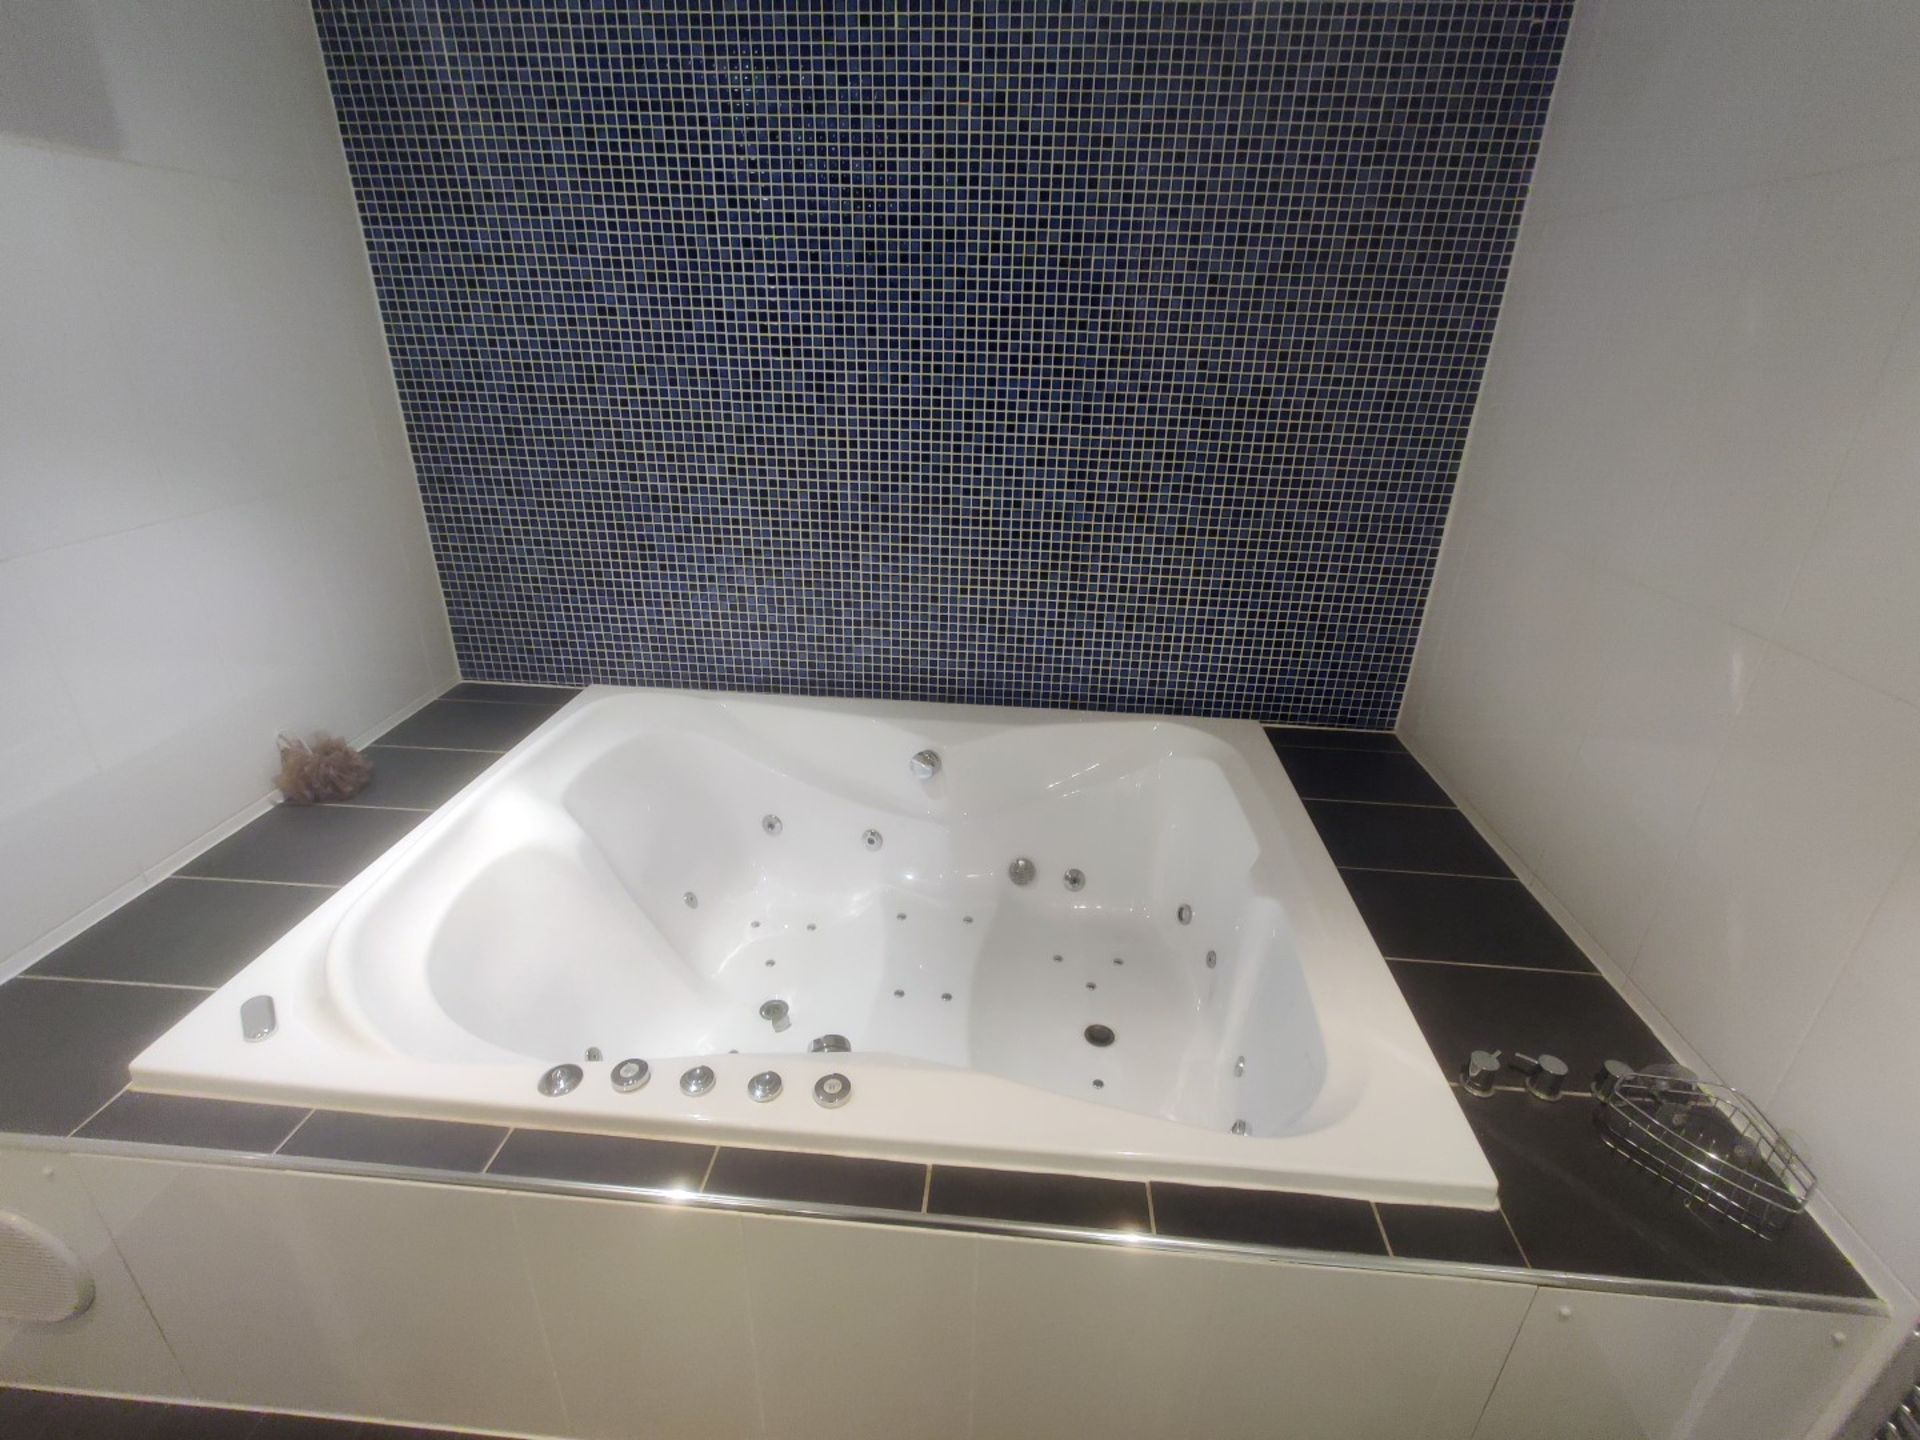 1 x Bronte Jacuzzi Whirlpool Bath - Approx 6.5ft x 5ft Size - Includes Brassware, Water Jets & Pump - Image 3 of 15